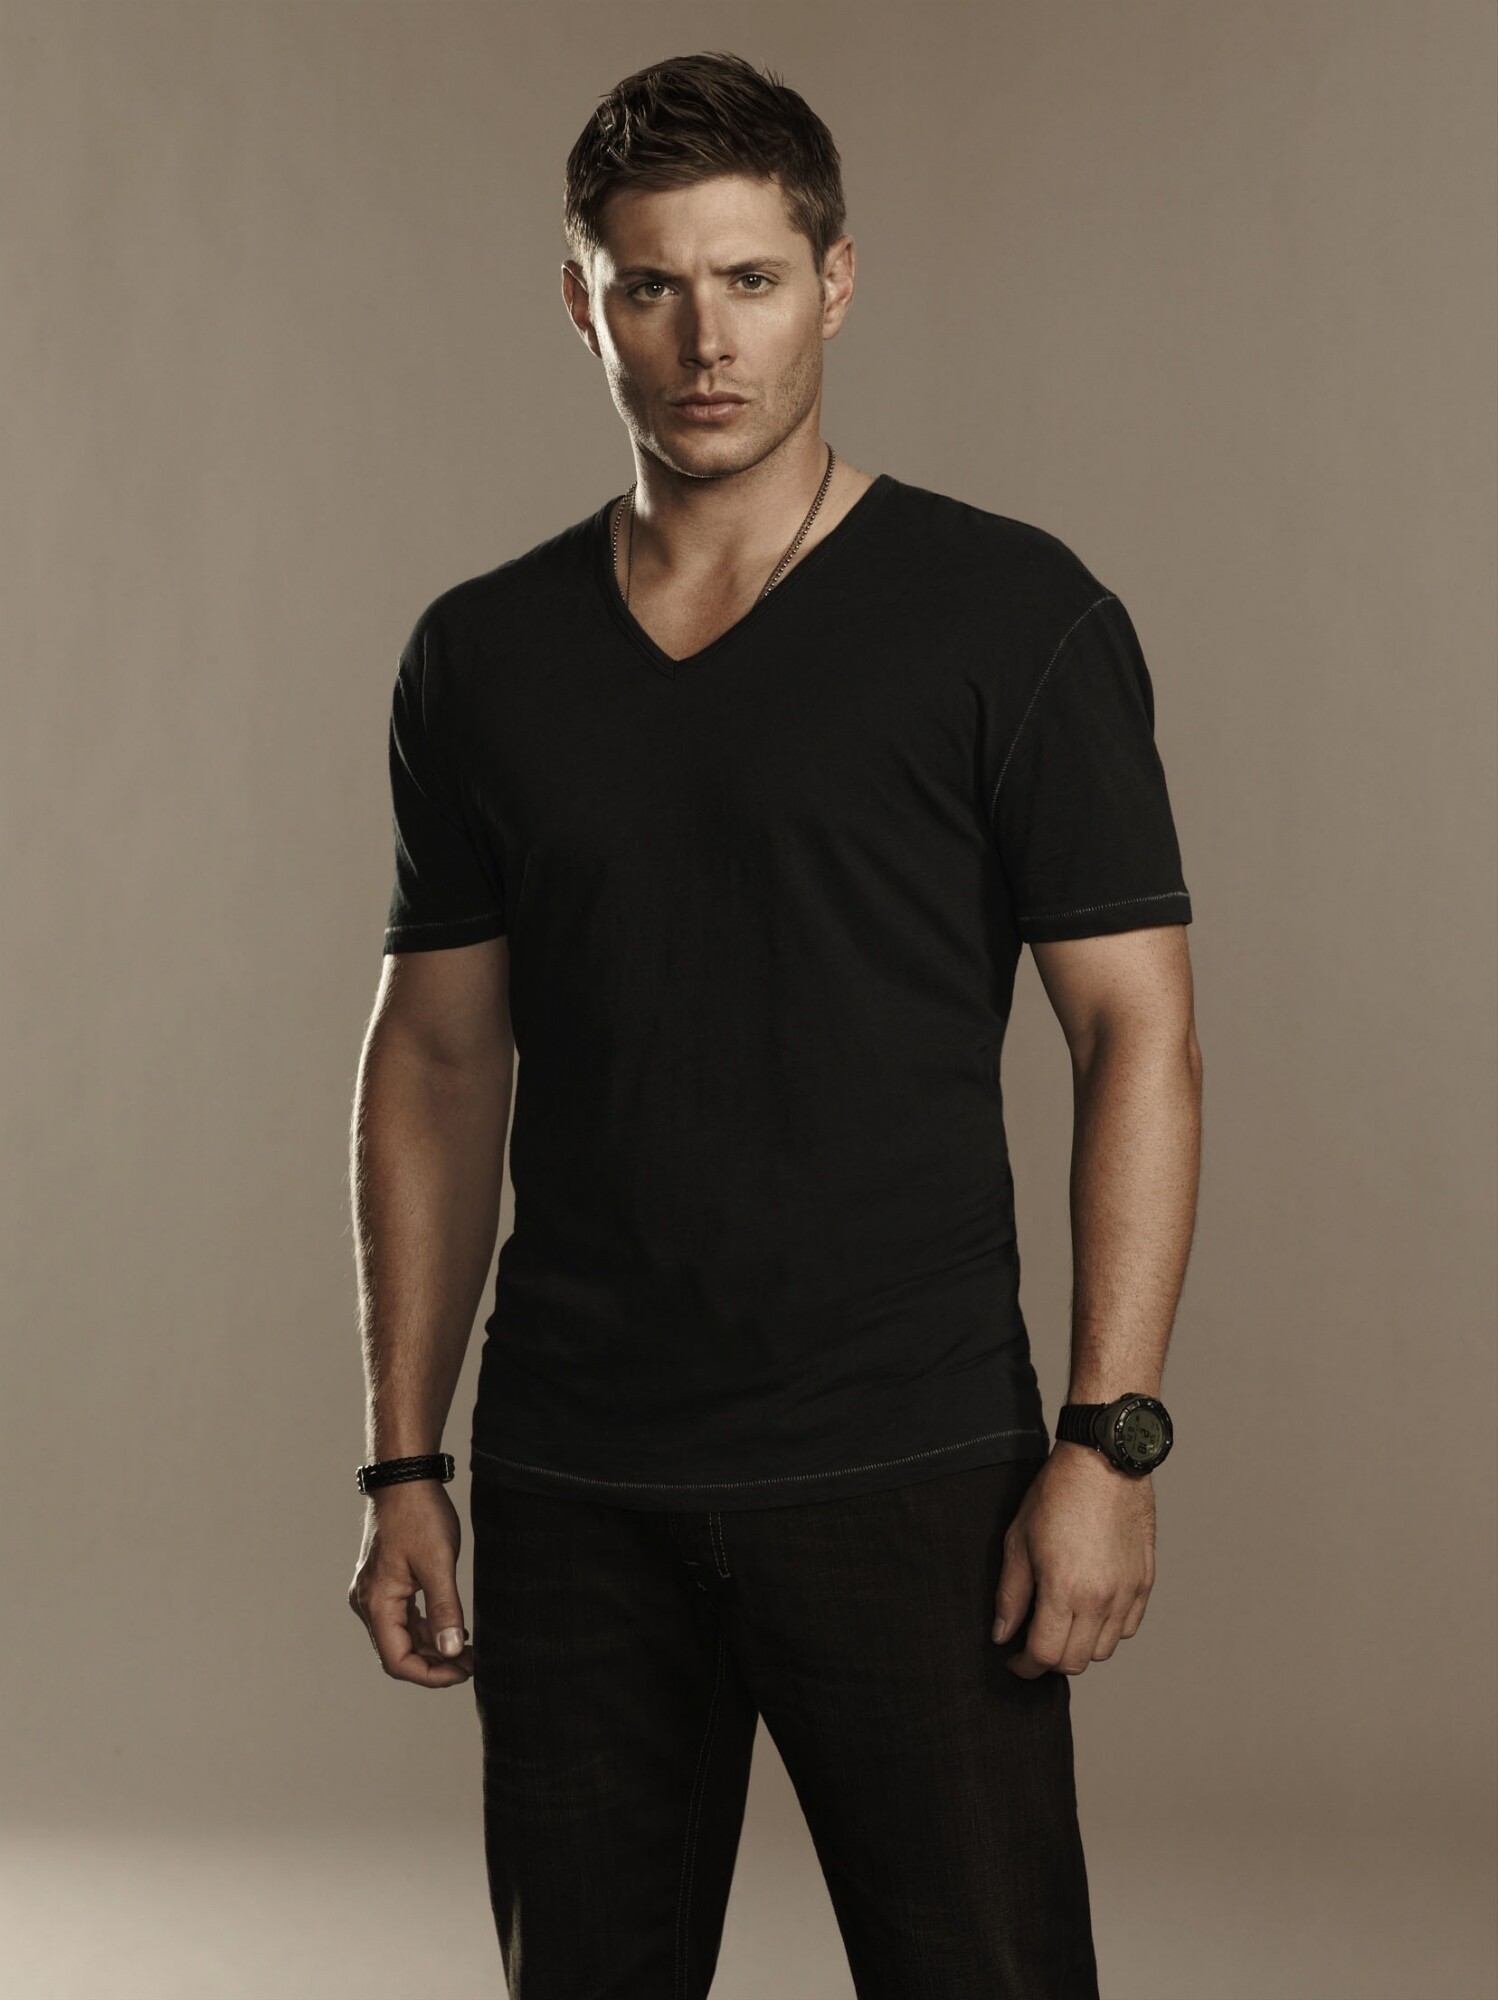 Jensen Ackles: Appeared in the television series Dark Angel on Fox in 2001 as serial killer X5-493. 1500x2000 HD Background.